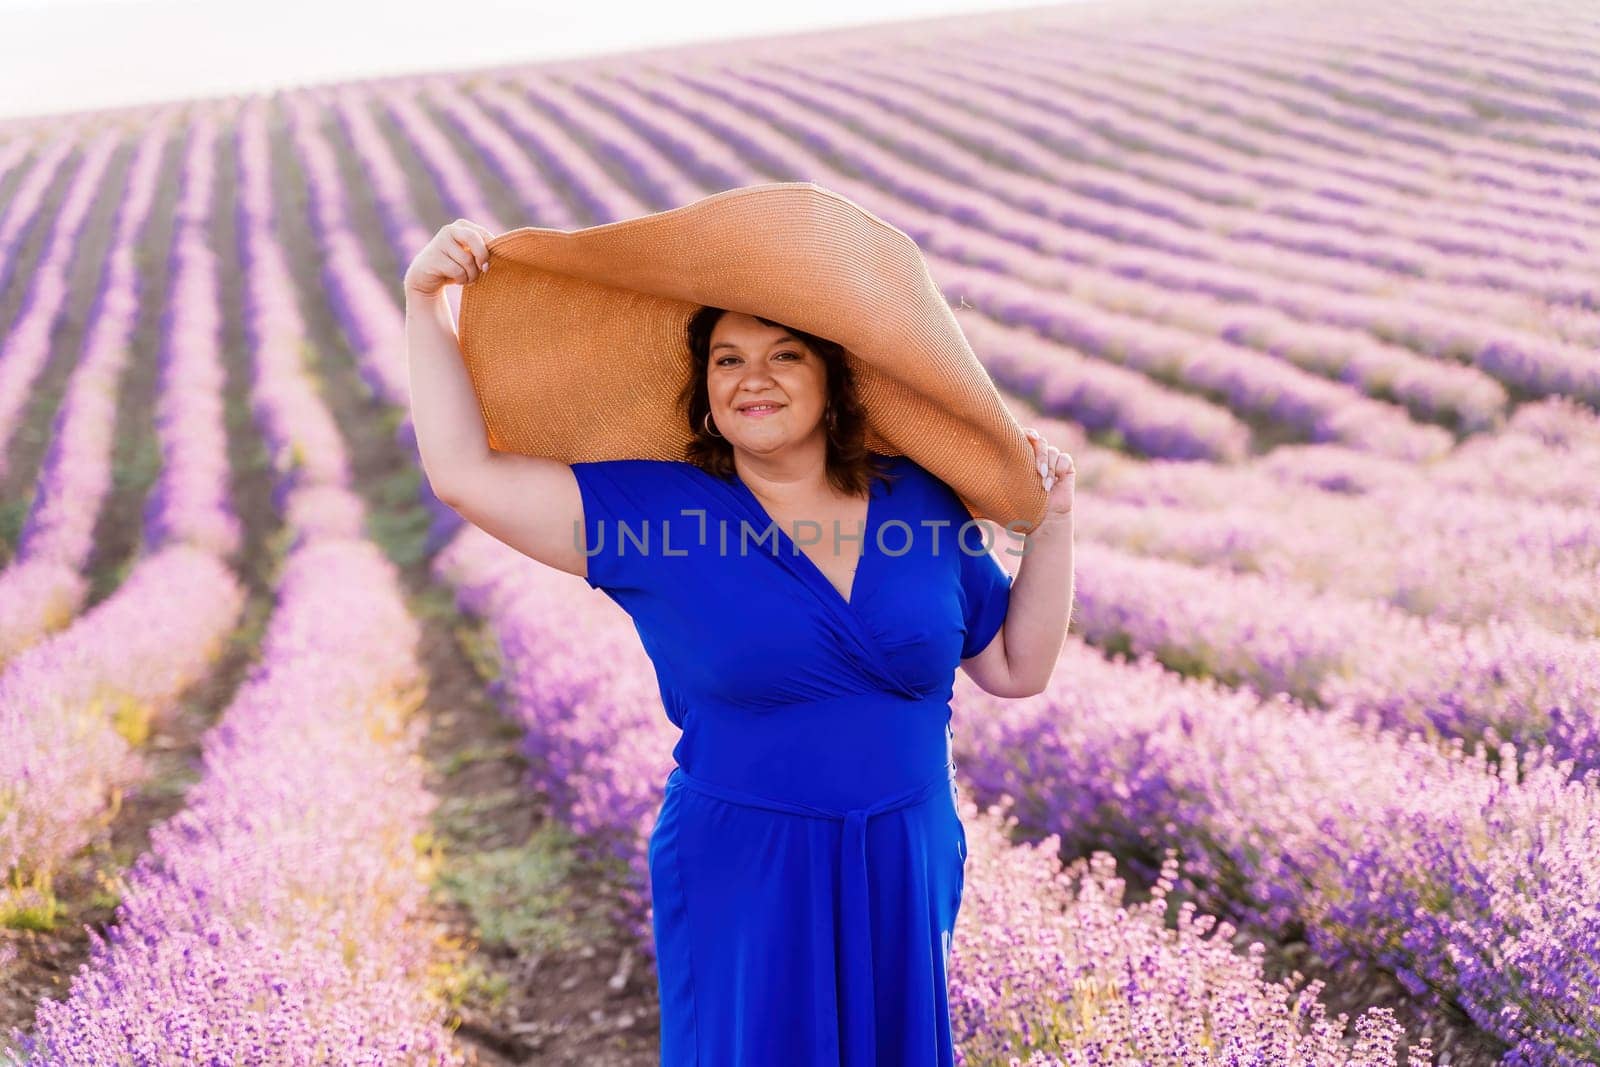 Woman lavender field sunset. Romantic woman walks through the lavender fields. illuminated by sunset sunlight. She is wearing a blue dress with a hat